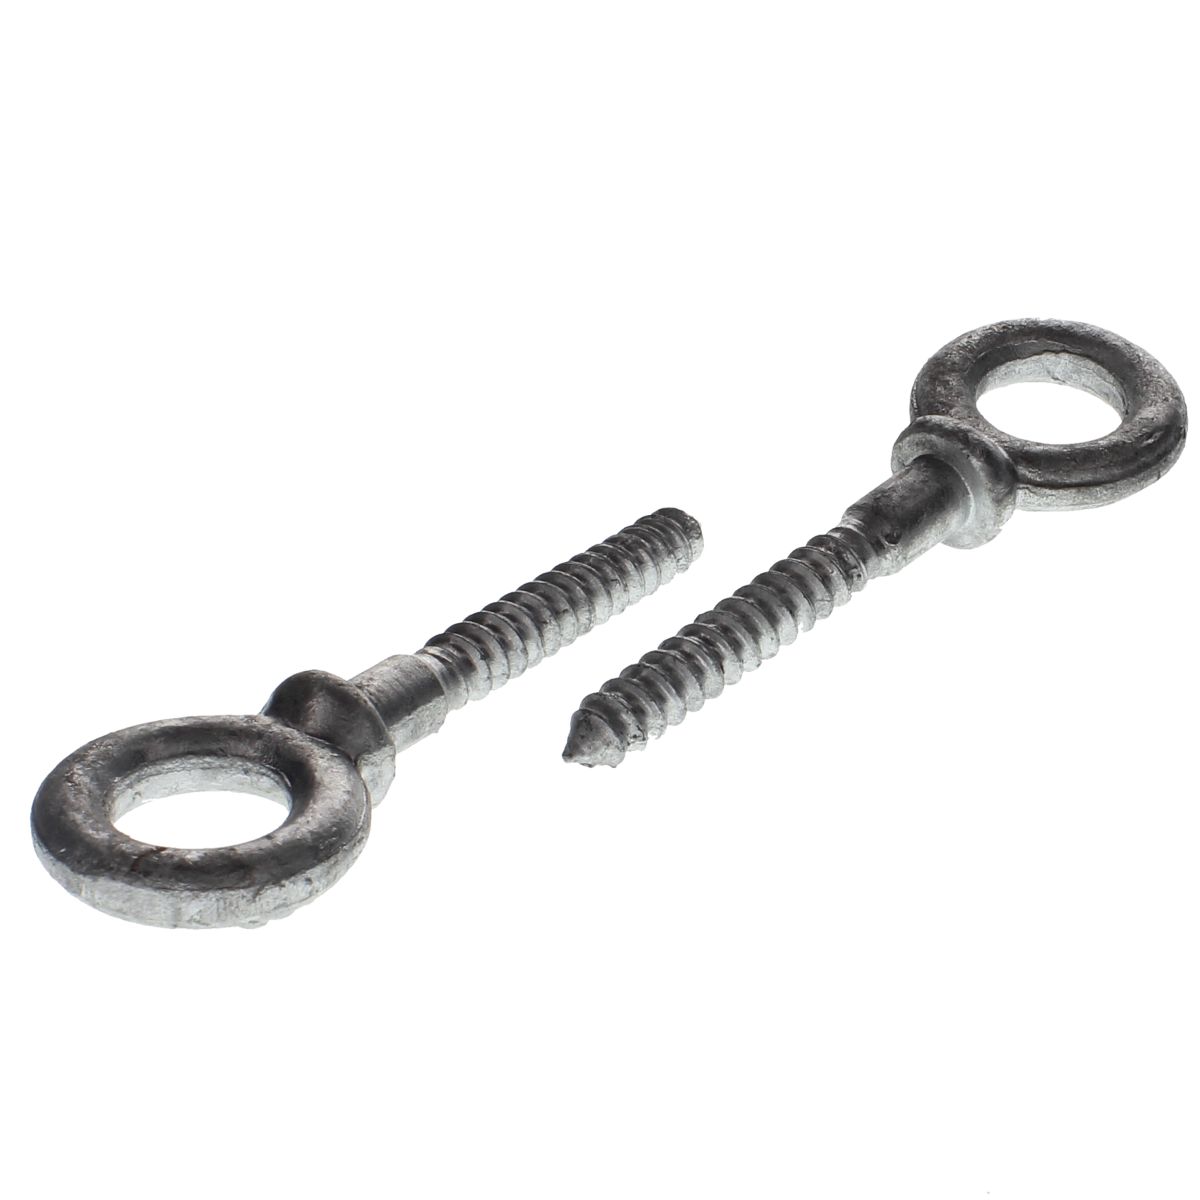 Galvanized Drop Forged Lag Eye Bolts, Size: 1/2 x 3-1/4